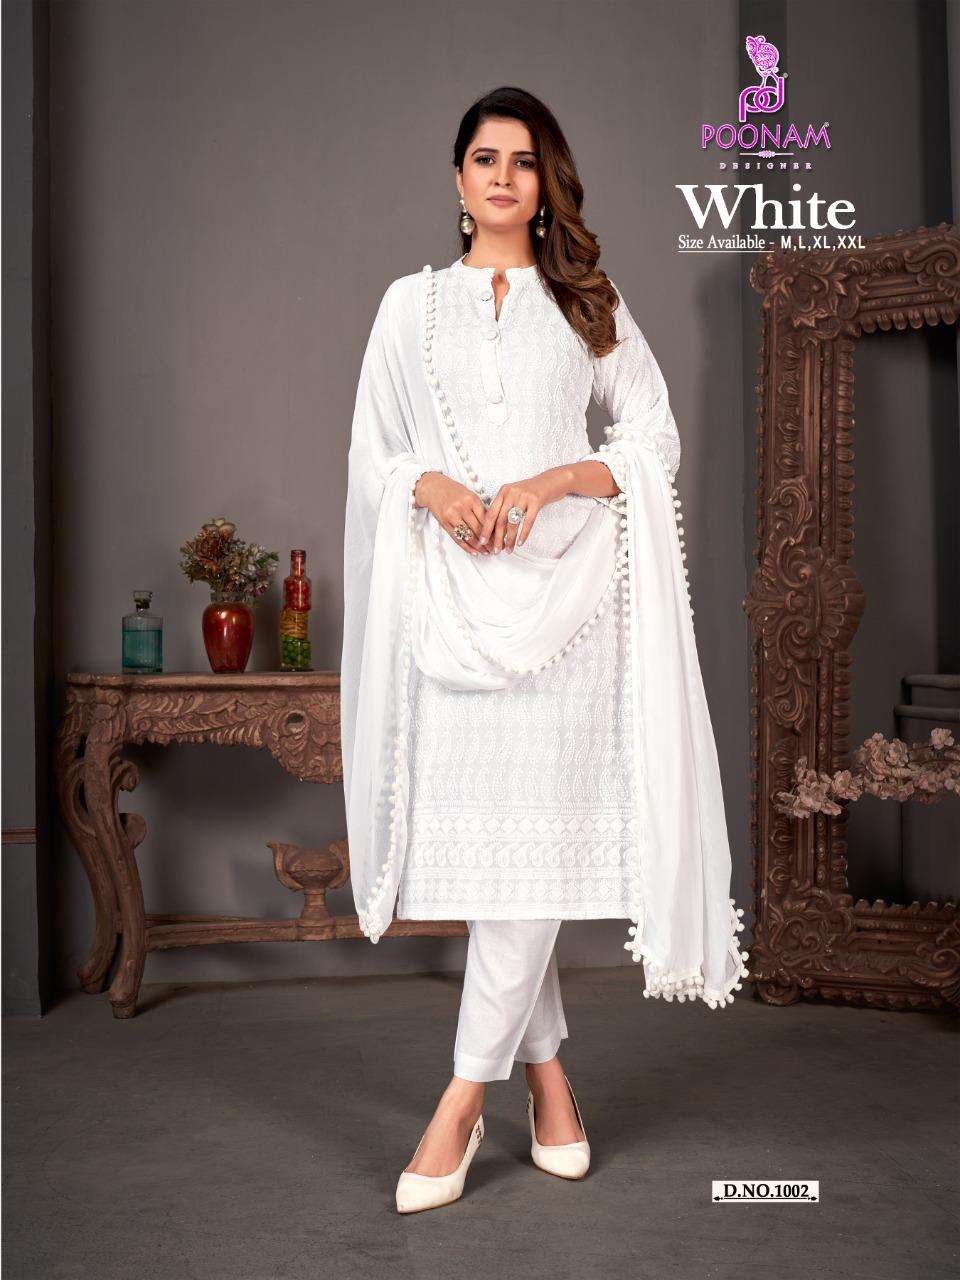 WHITE QUEEN GOWN BY POONAM DESIGNER PRESENTS RAYON CHIKAN WORK GOWN STYLE  KURTI WITH 3-4TH SLEEVES - WHOLESALER AND DEALER